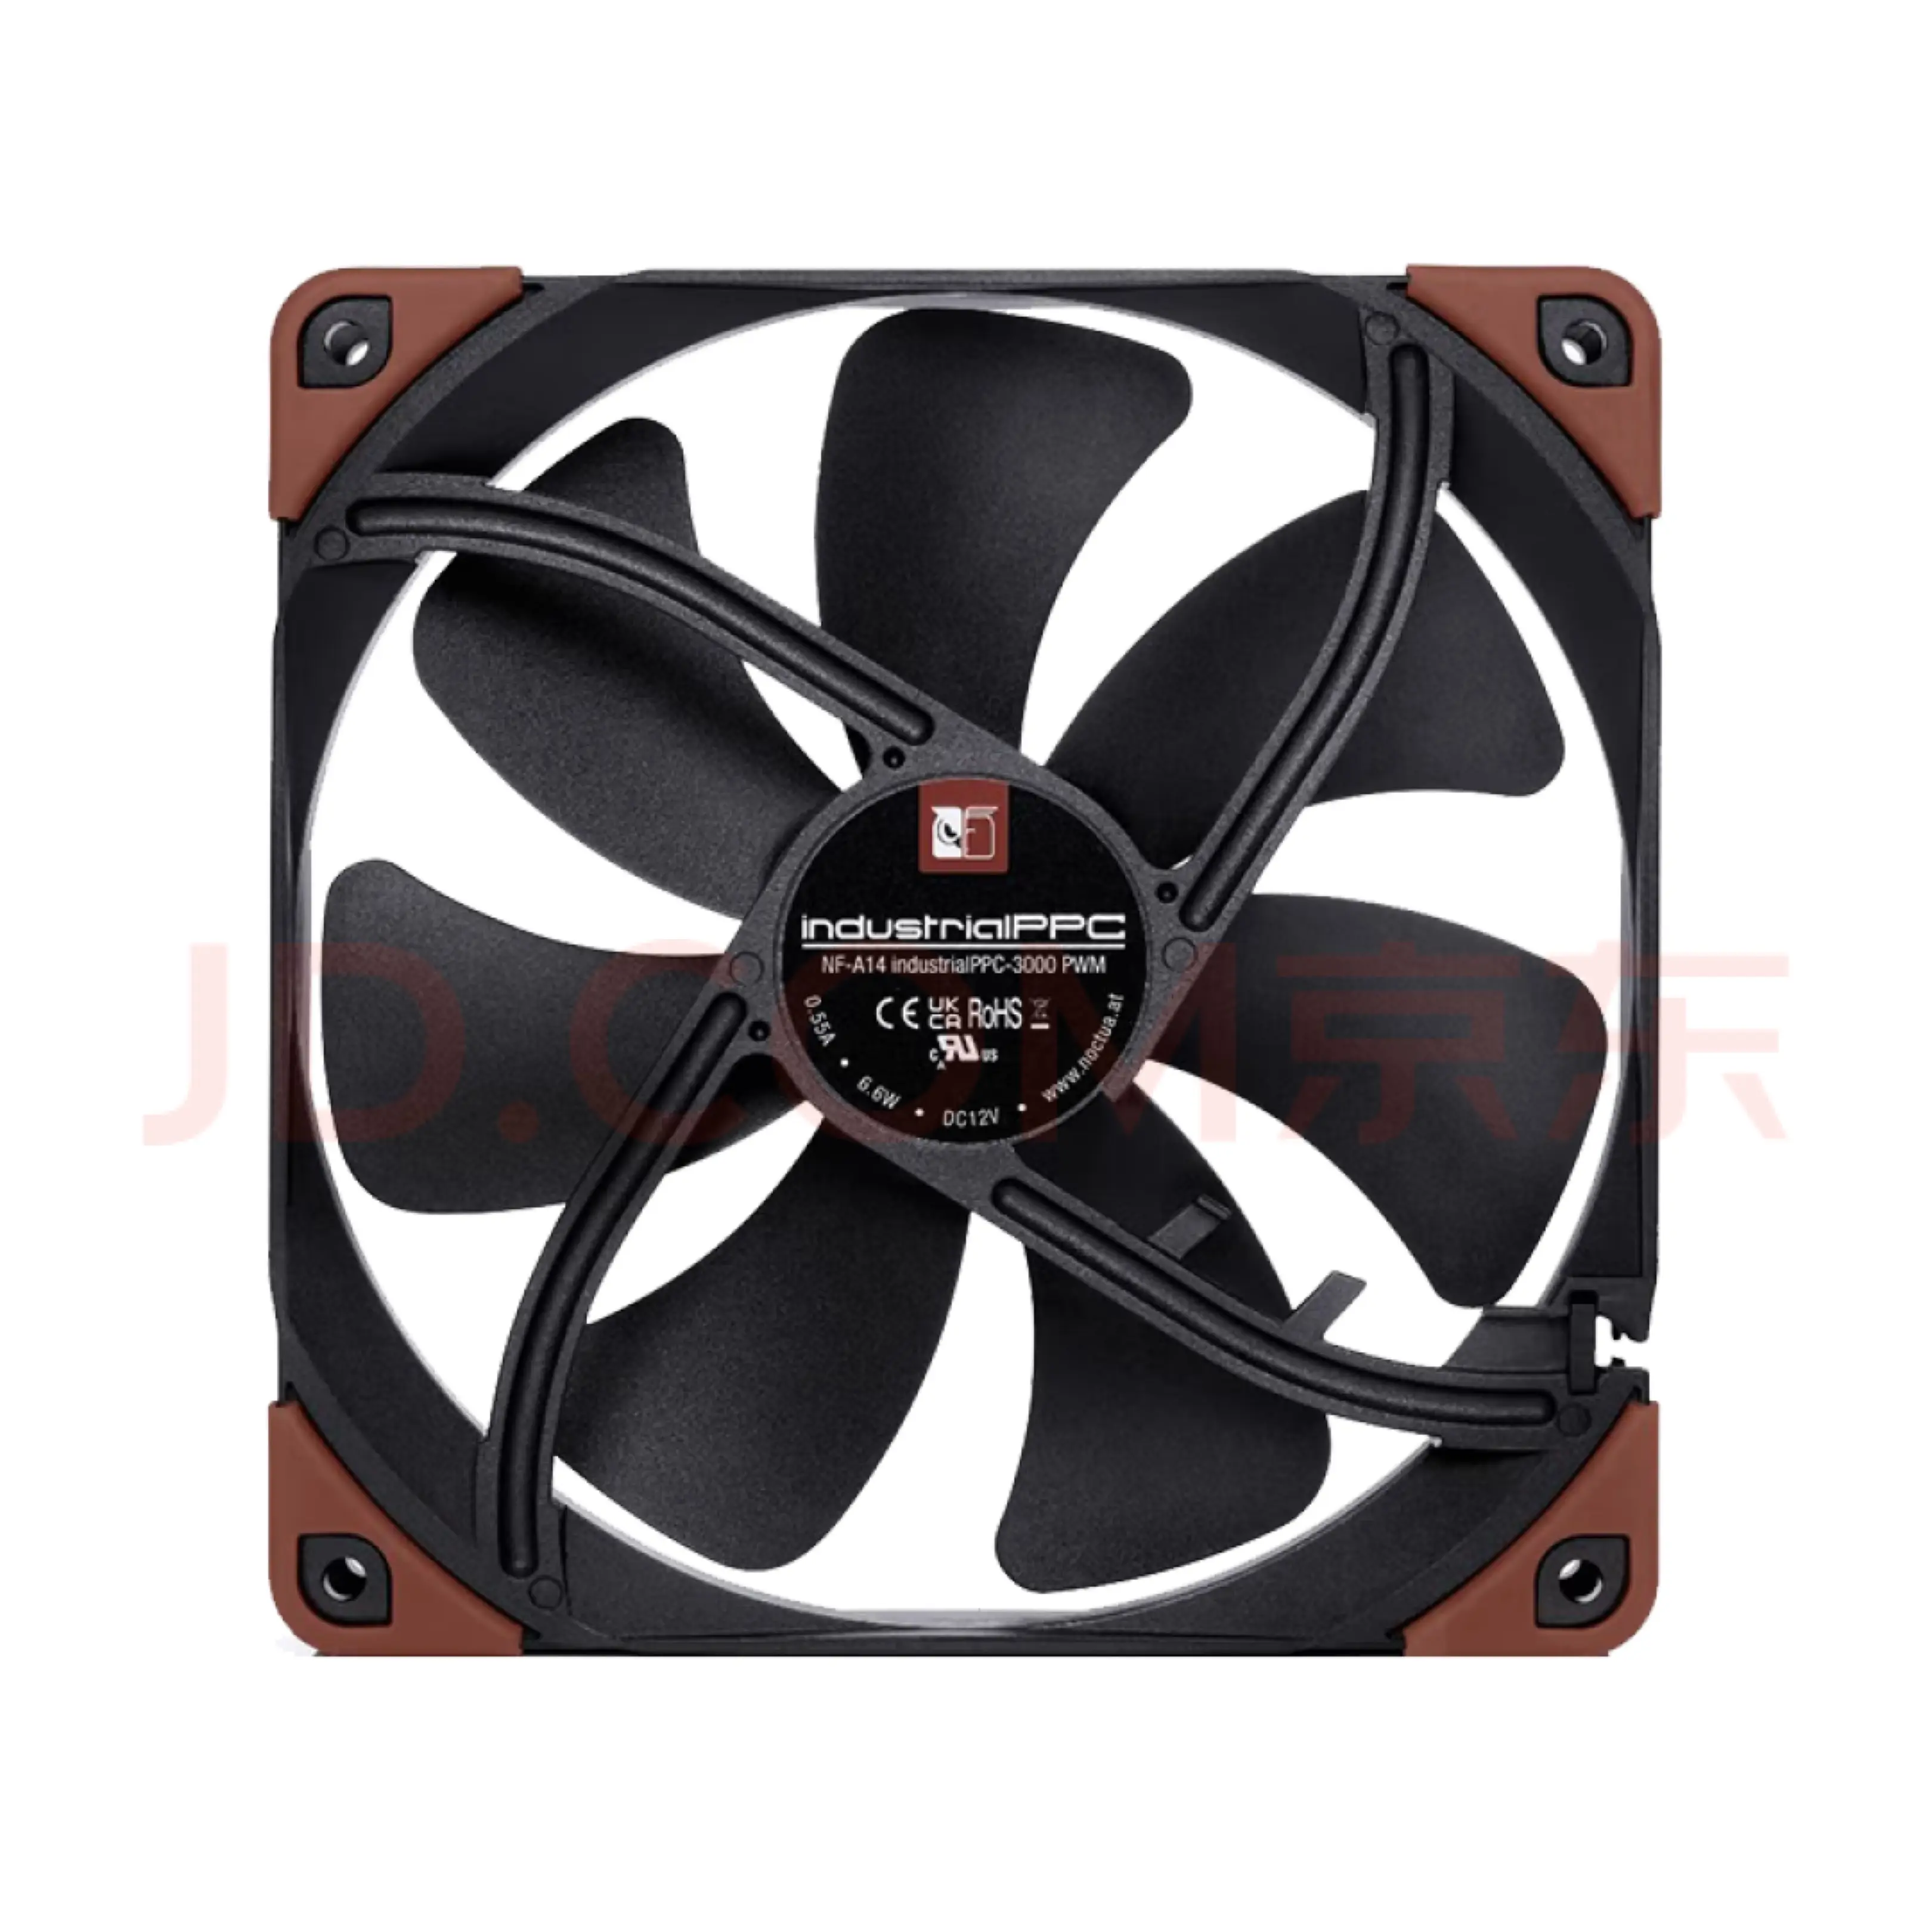 Noctua Silent fan 140x140x25mm NF-A14 PPC2000 PWM temperature controlled chassis fan 14cm 3000rpm cold exhaust industrial fan